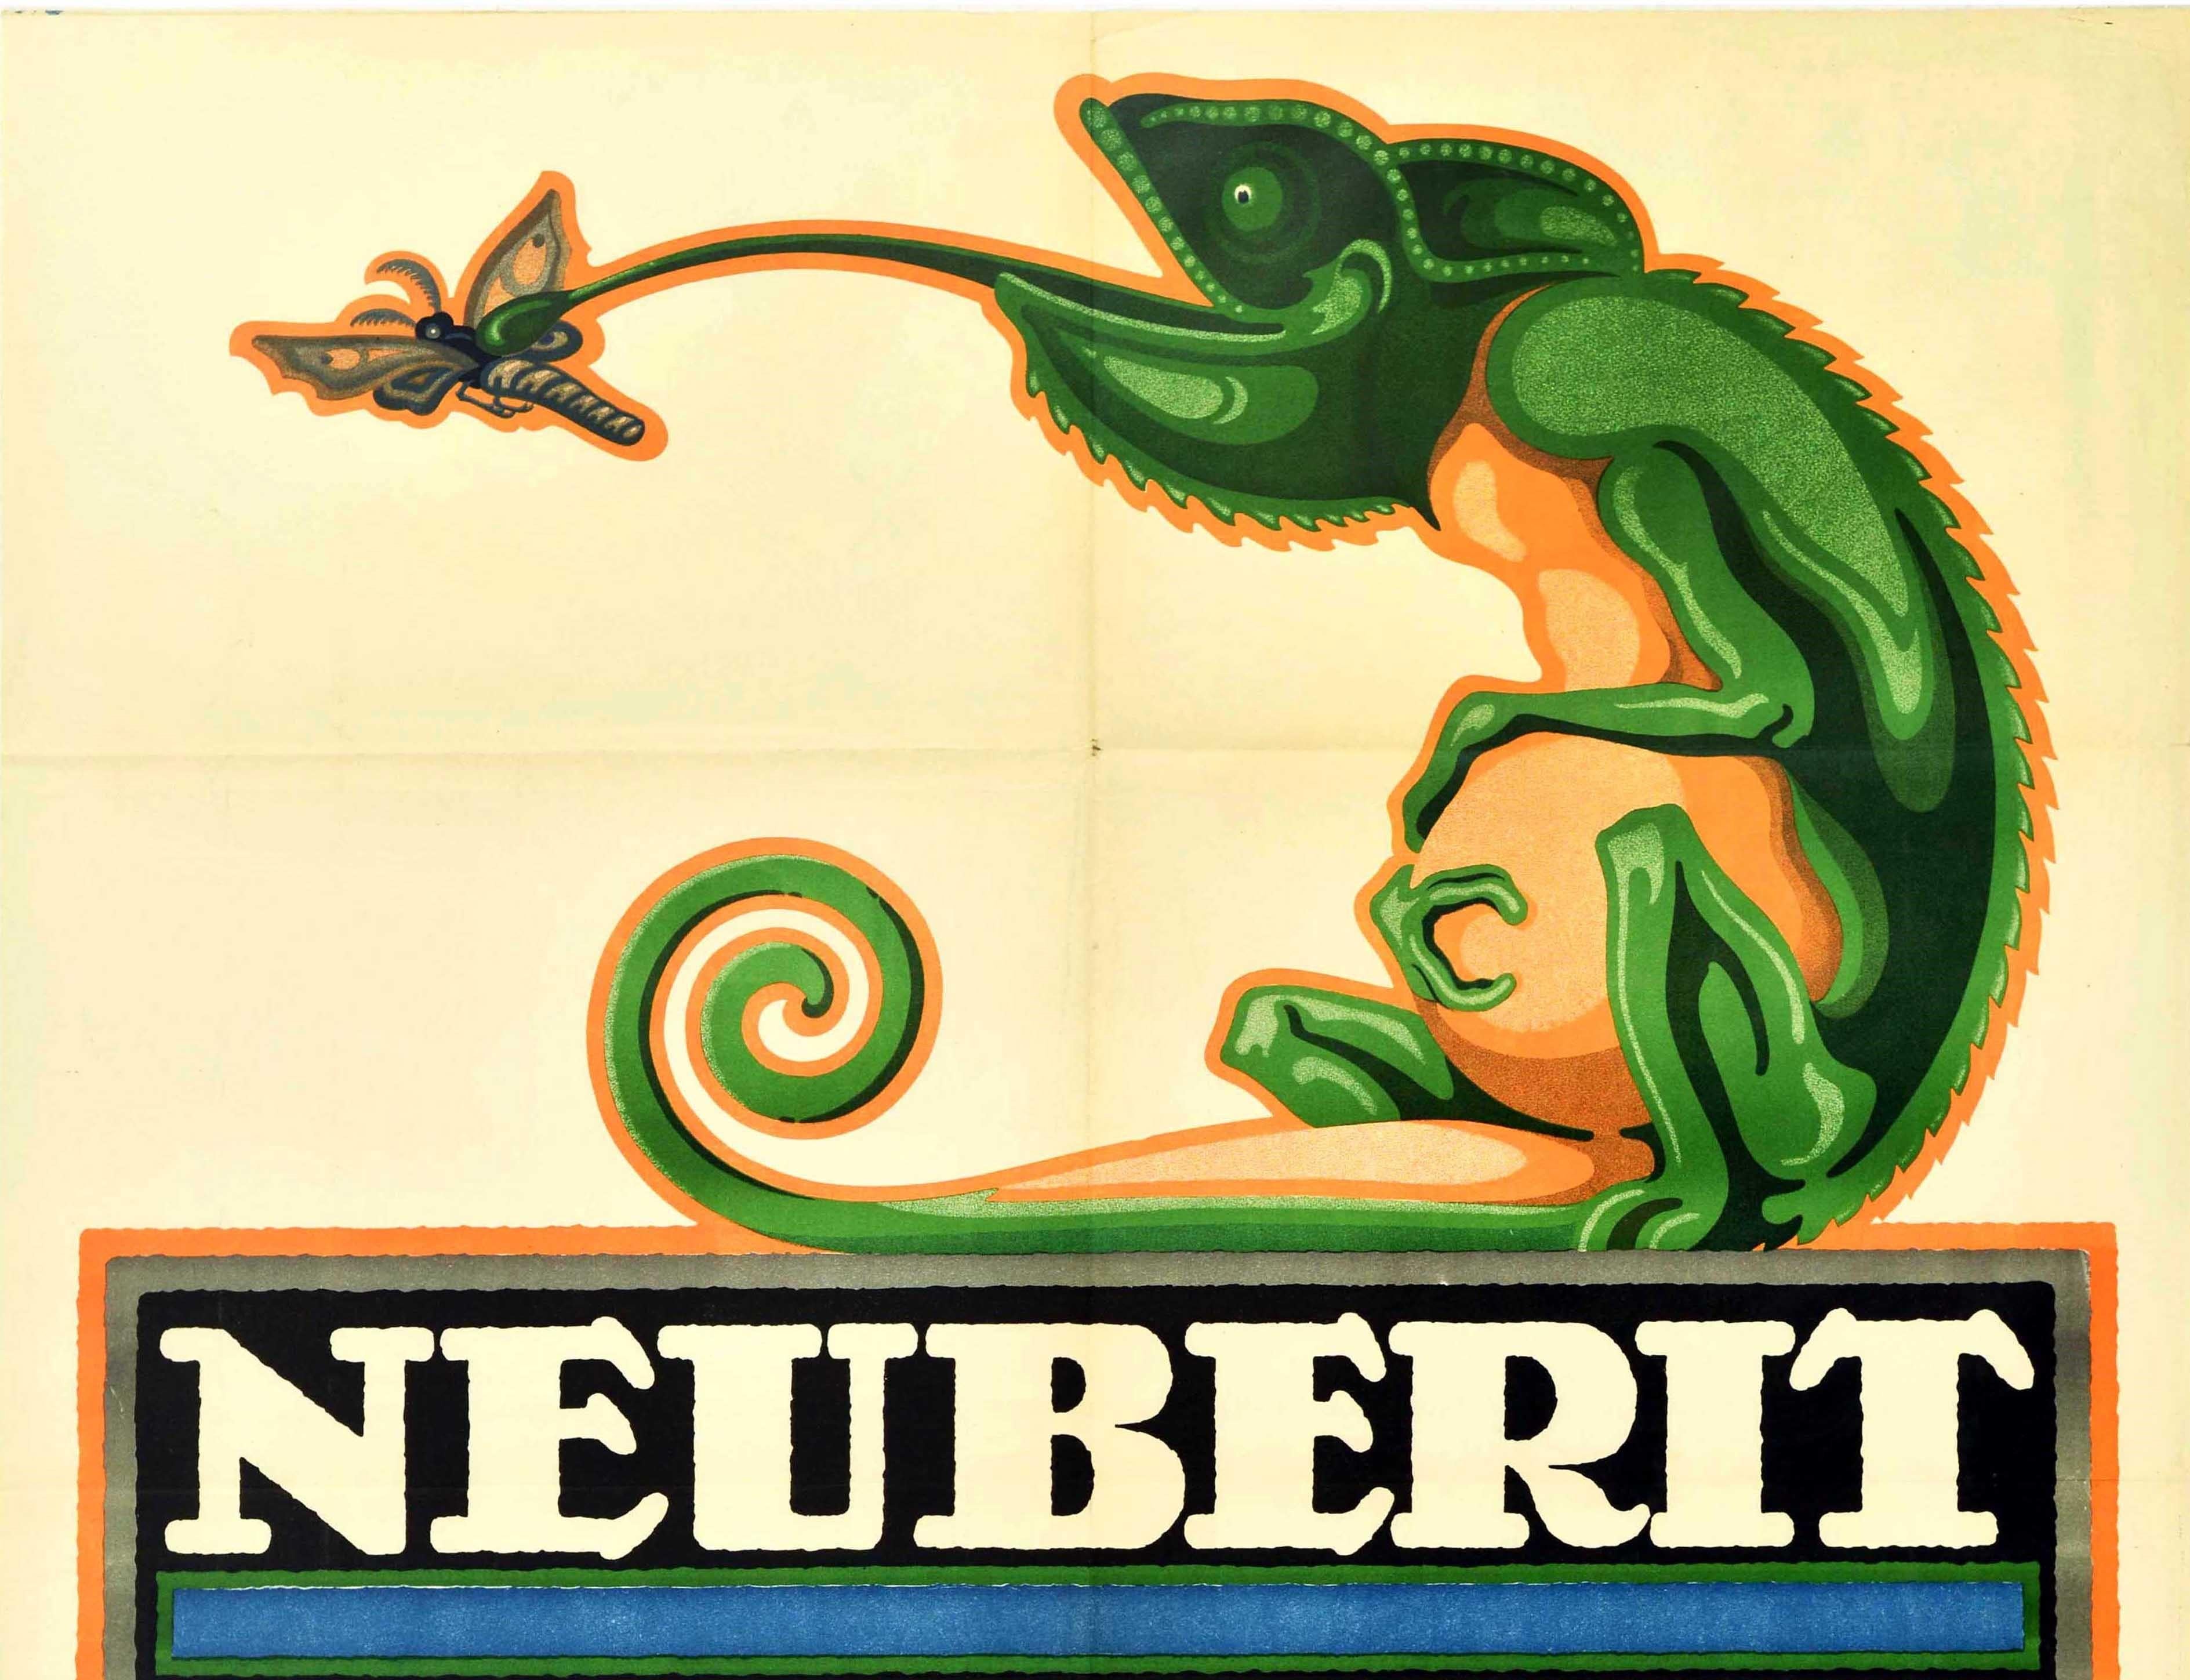 Original antique advertising poster for Neuberit moth and insect repellent featuring great artwork depicting a chameleon catching a bug with its tongue above the stylised text box - Neuberit bestes schutzmittel gegen motten und insekten Vollkommener